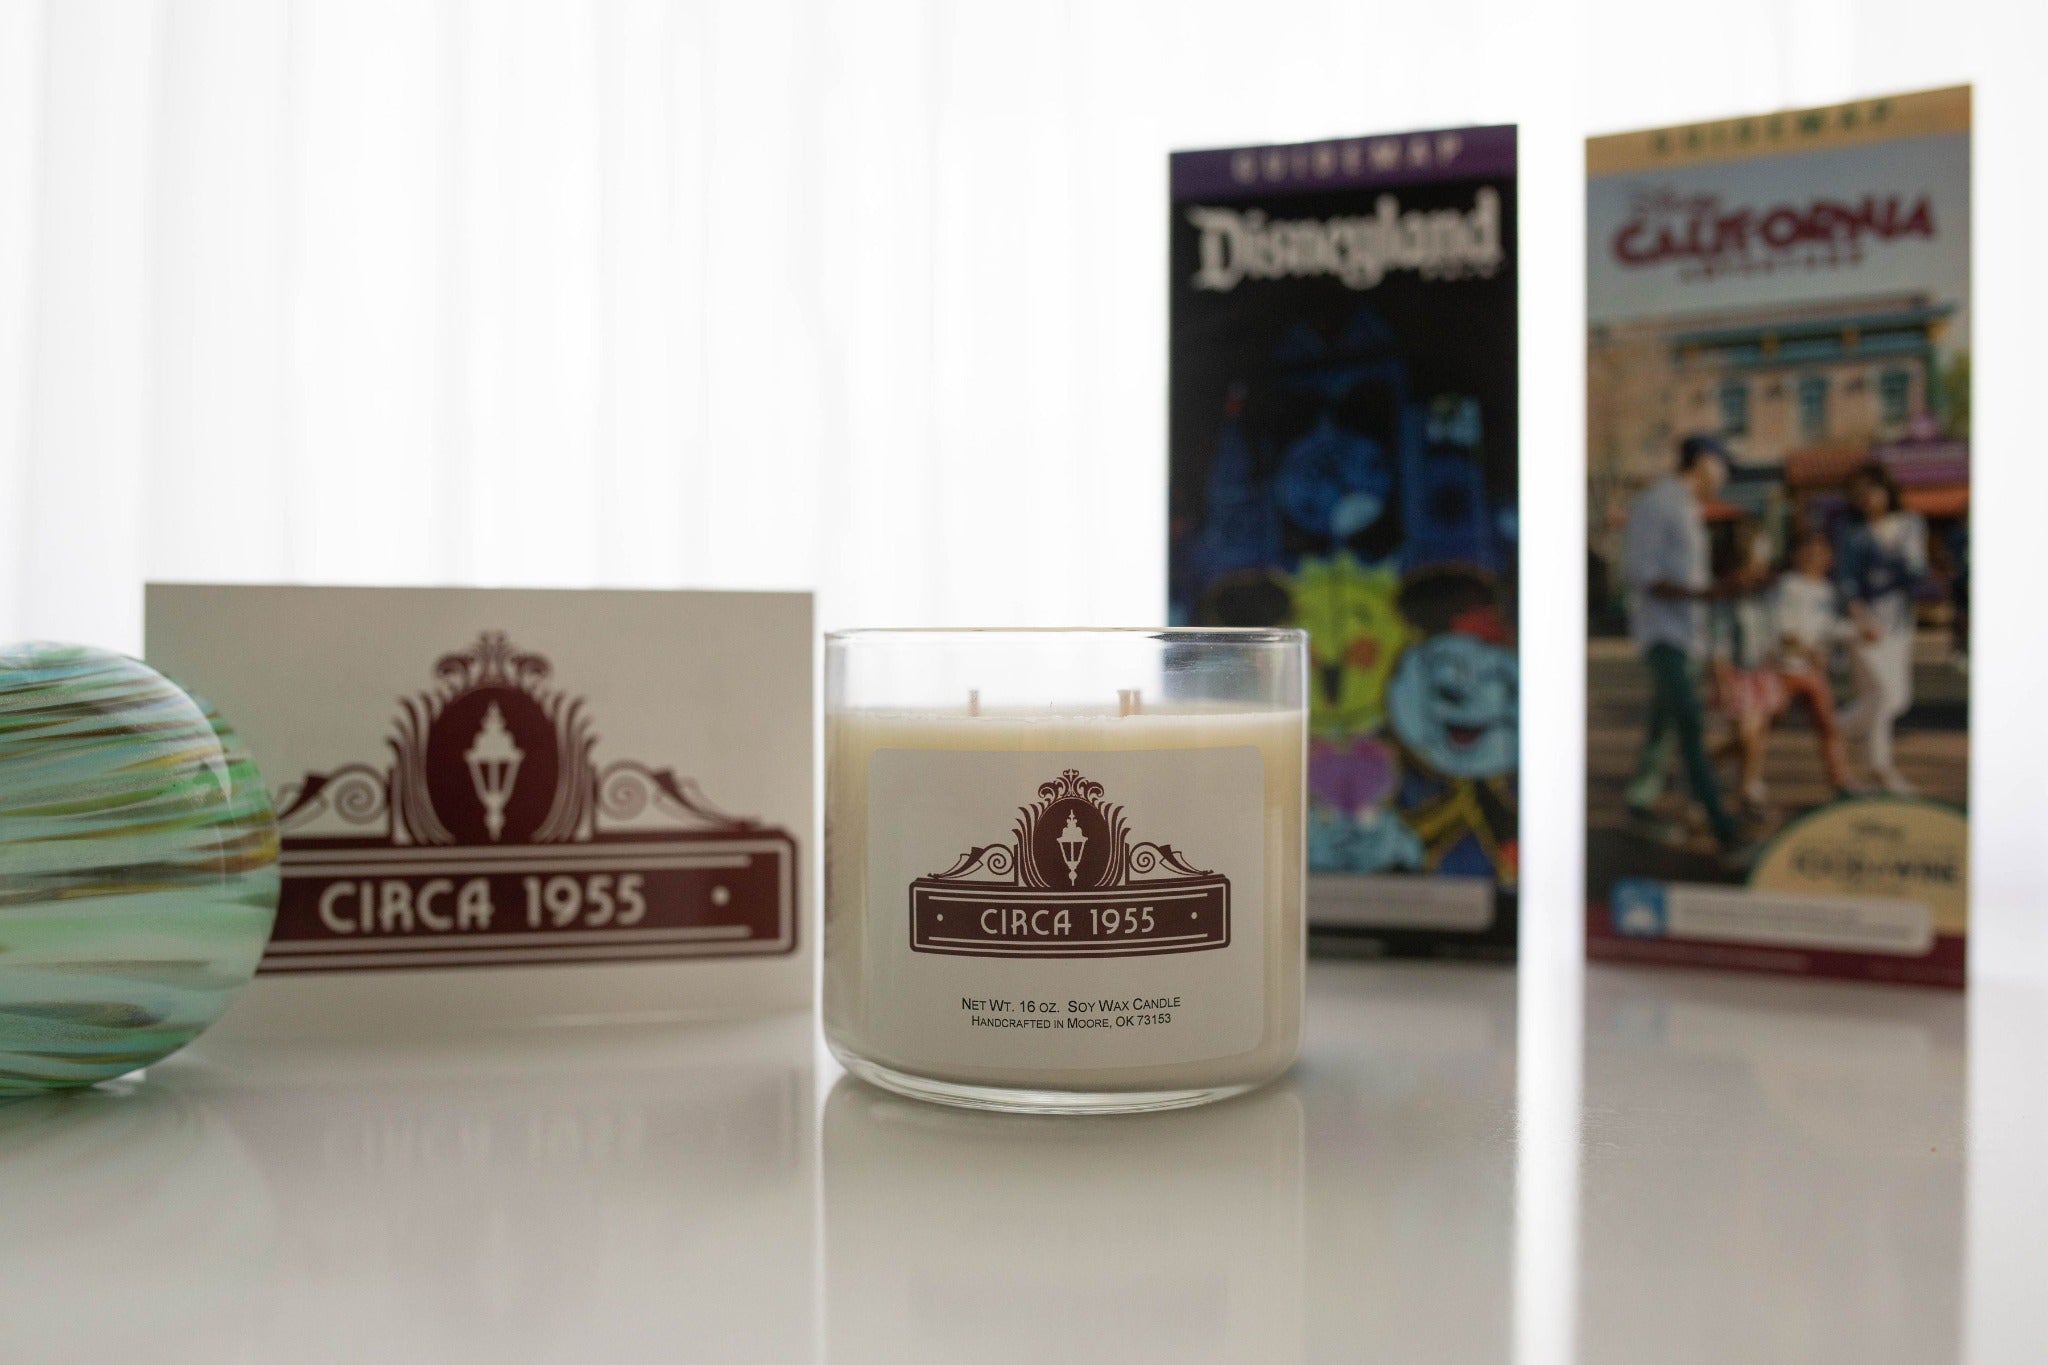 A three wick candle with a decorative blue and gold orb to the left and various Disney park maps to the right.